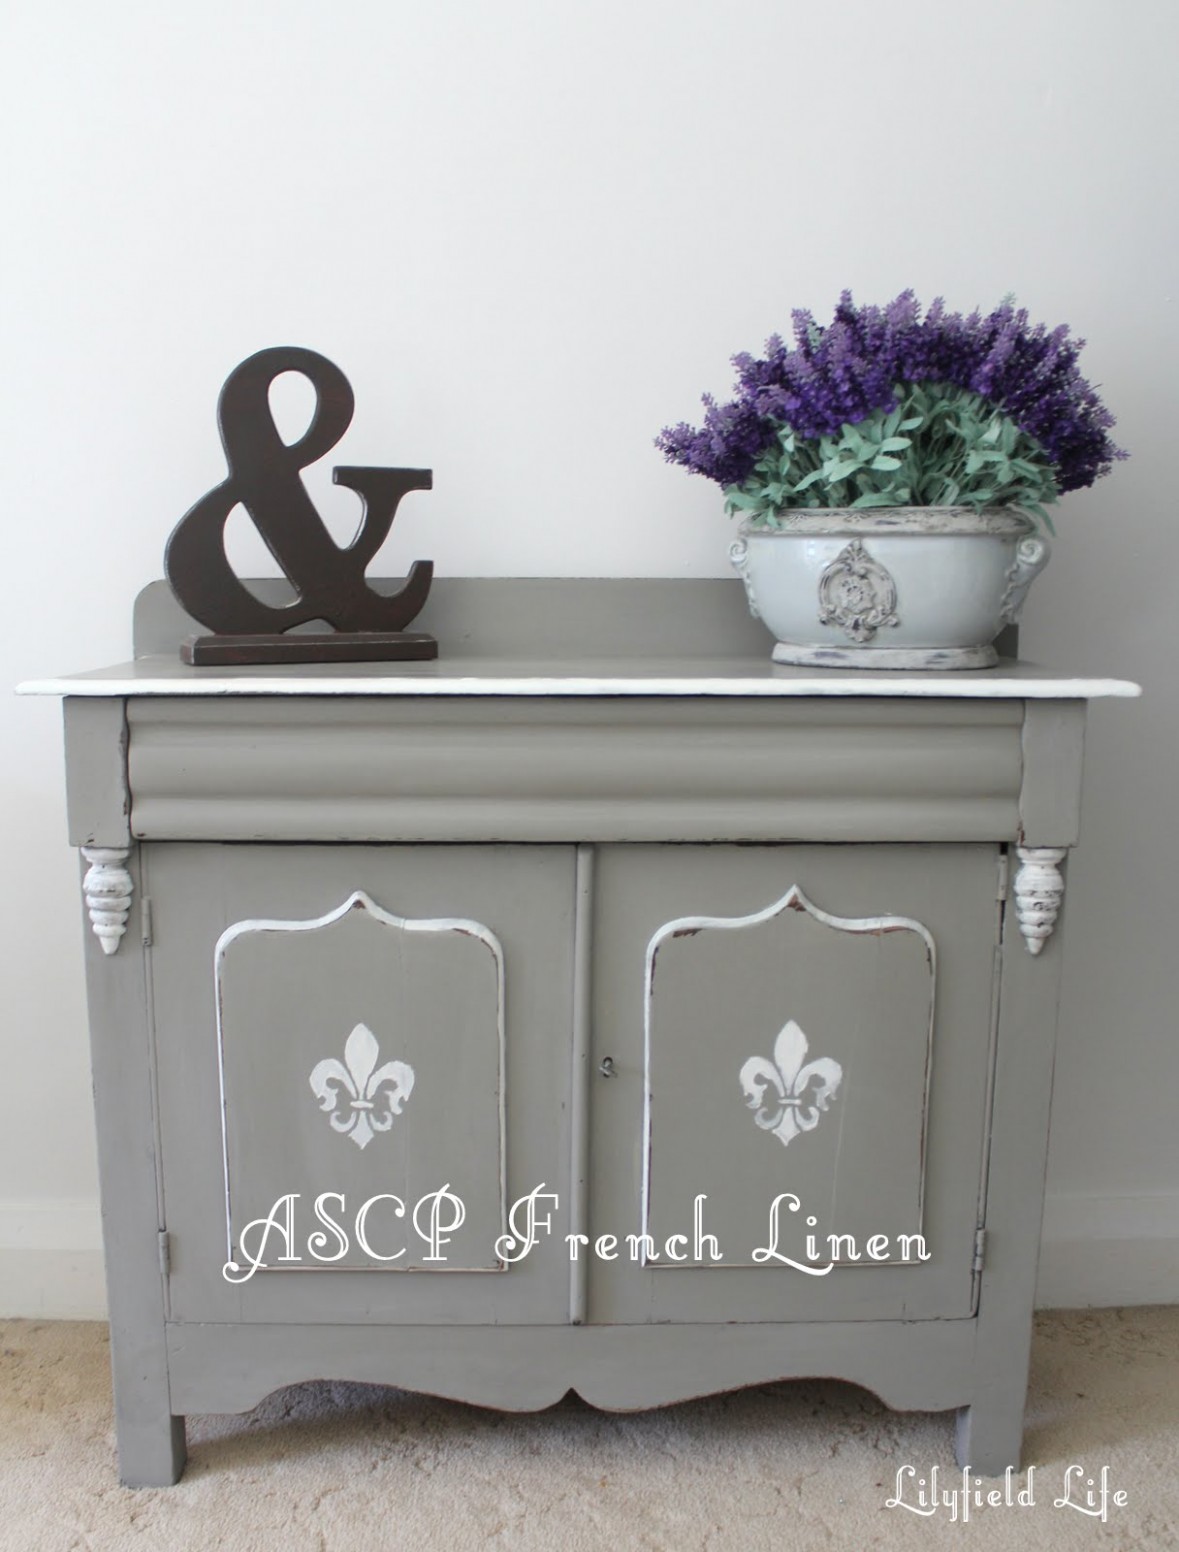 Lilyfield Life: Mix Tint Colour Annie Sloan Chalk Paint Annie Sloan French Linen And Old White